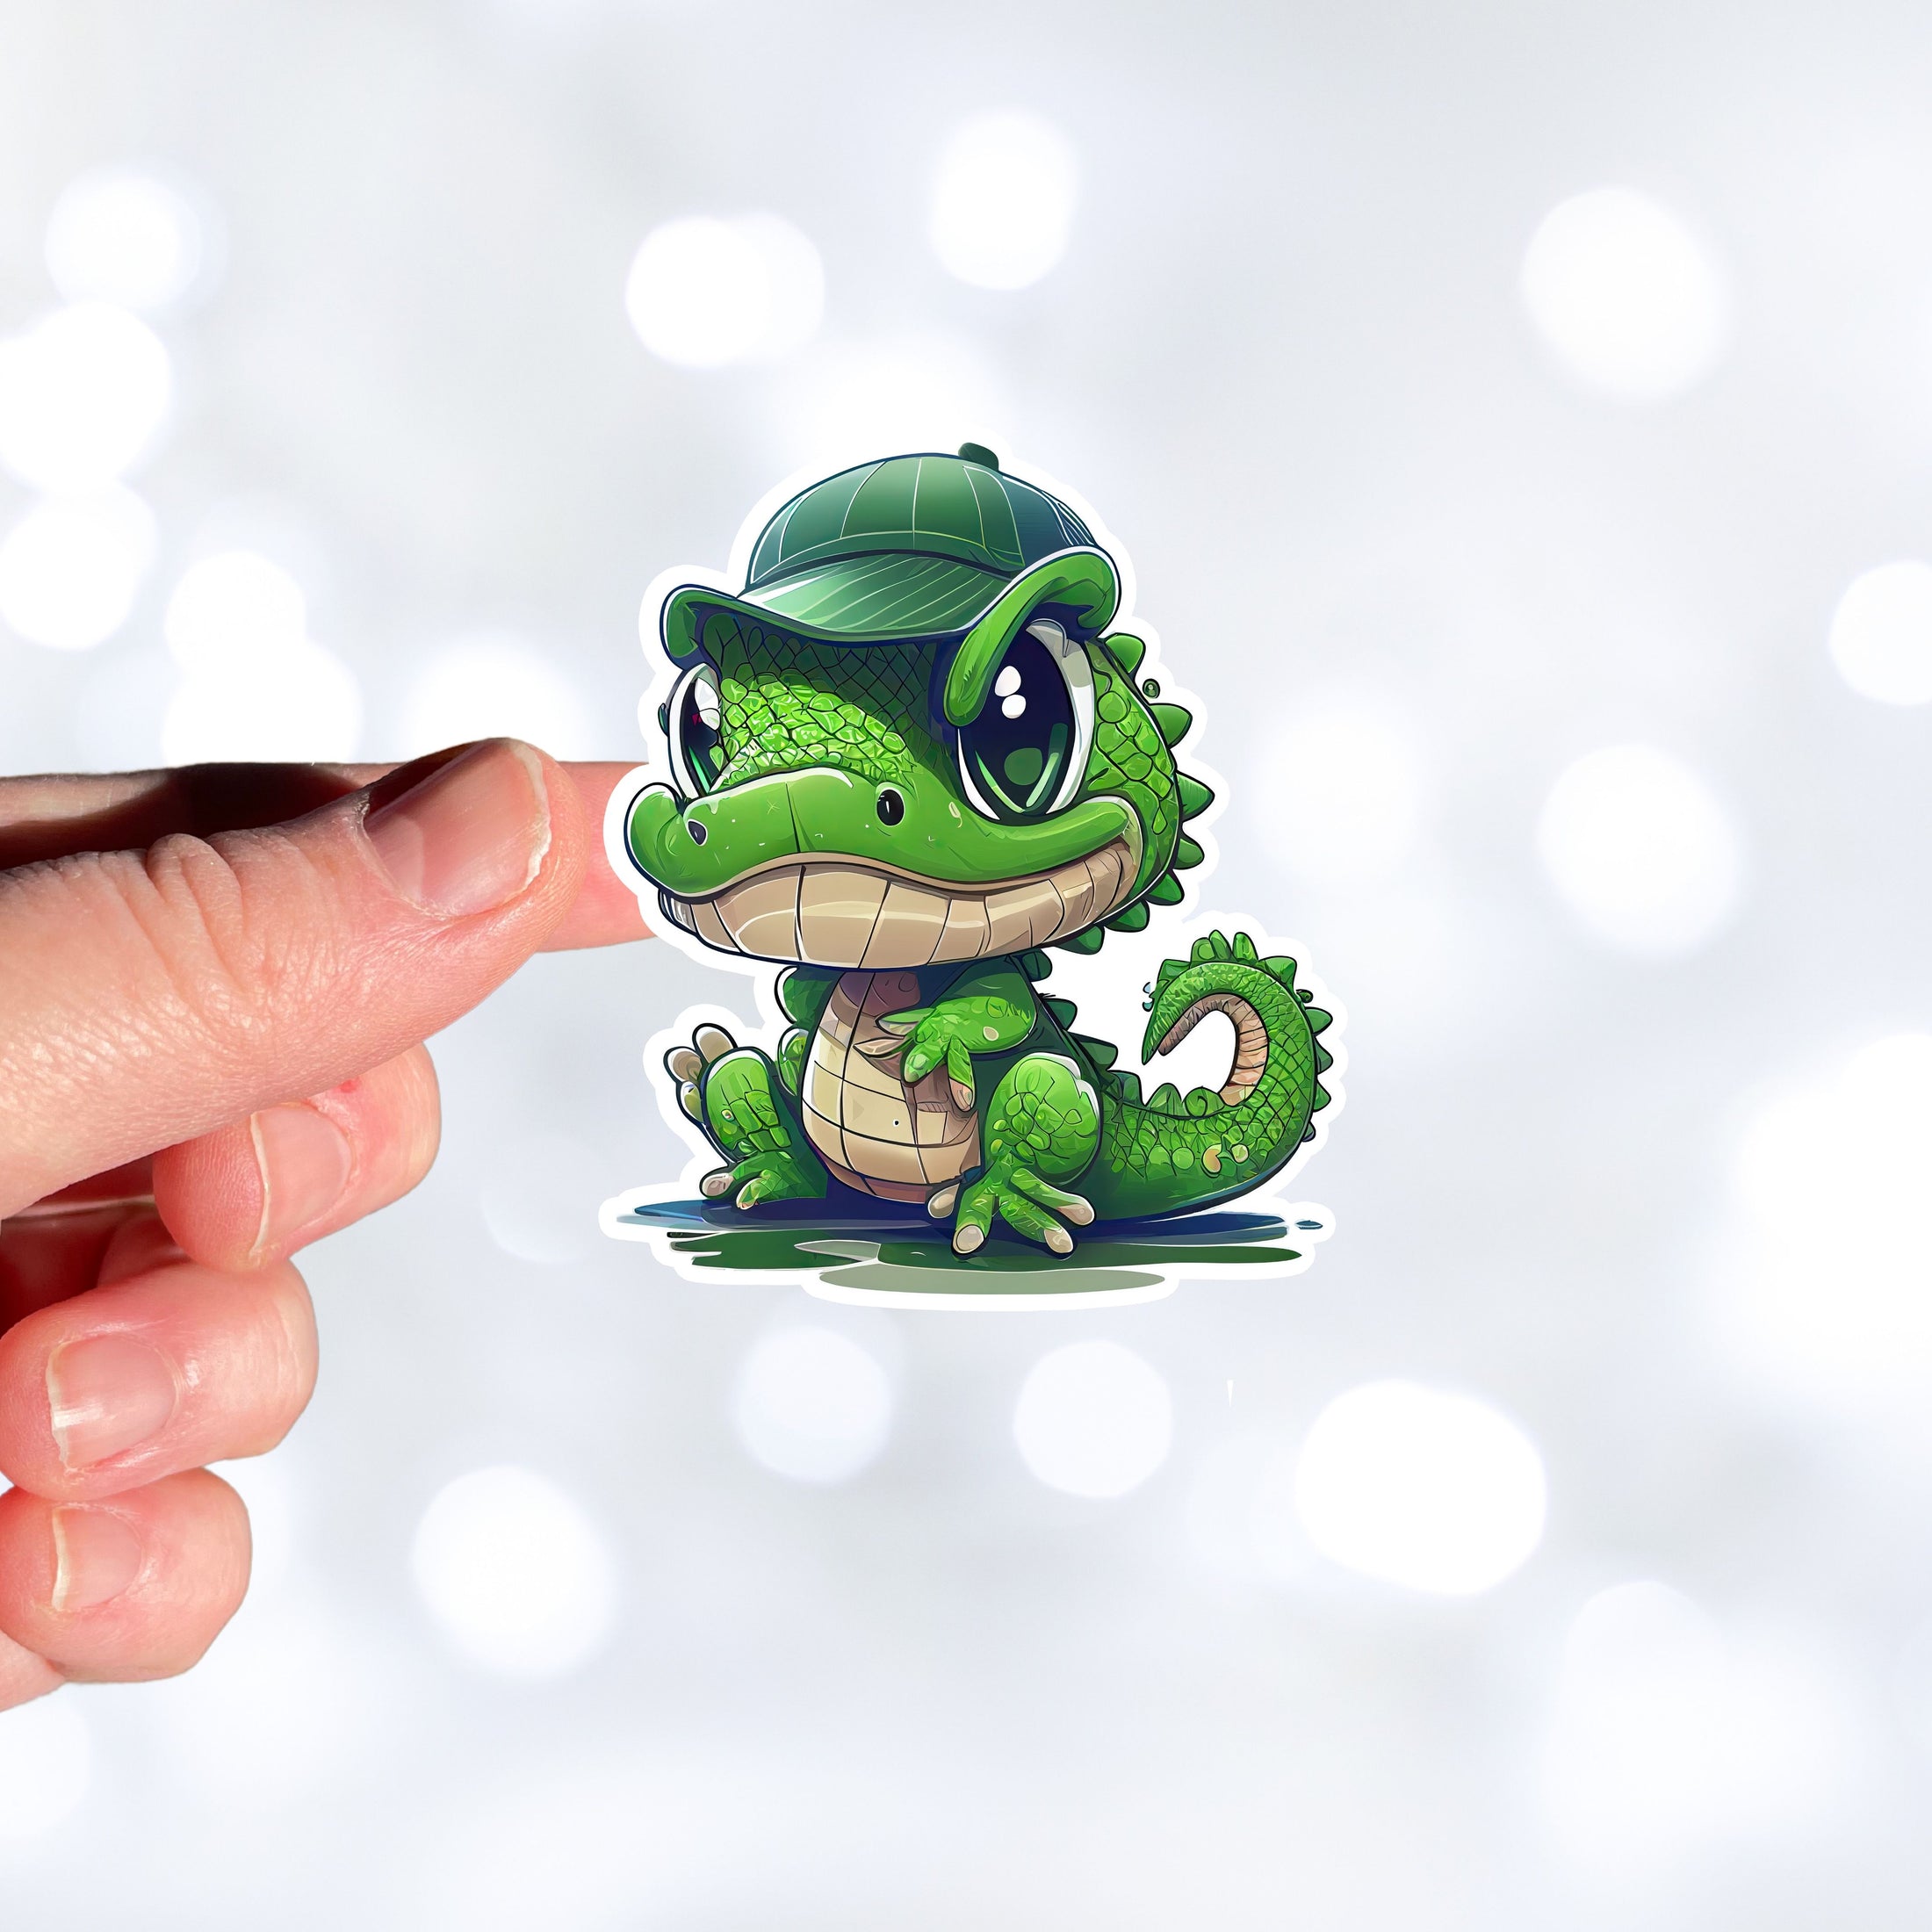 This image shows a hand holding the crocodile wearing a hat sticker.